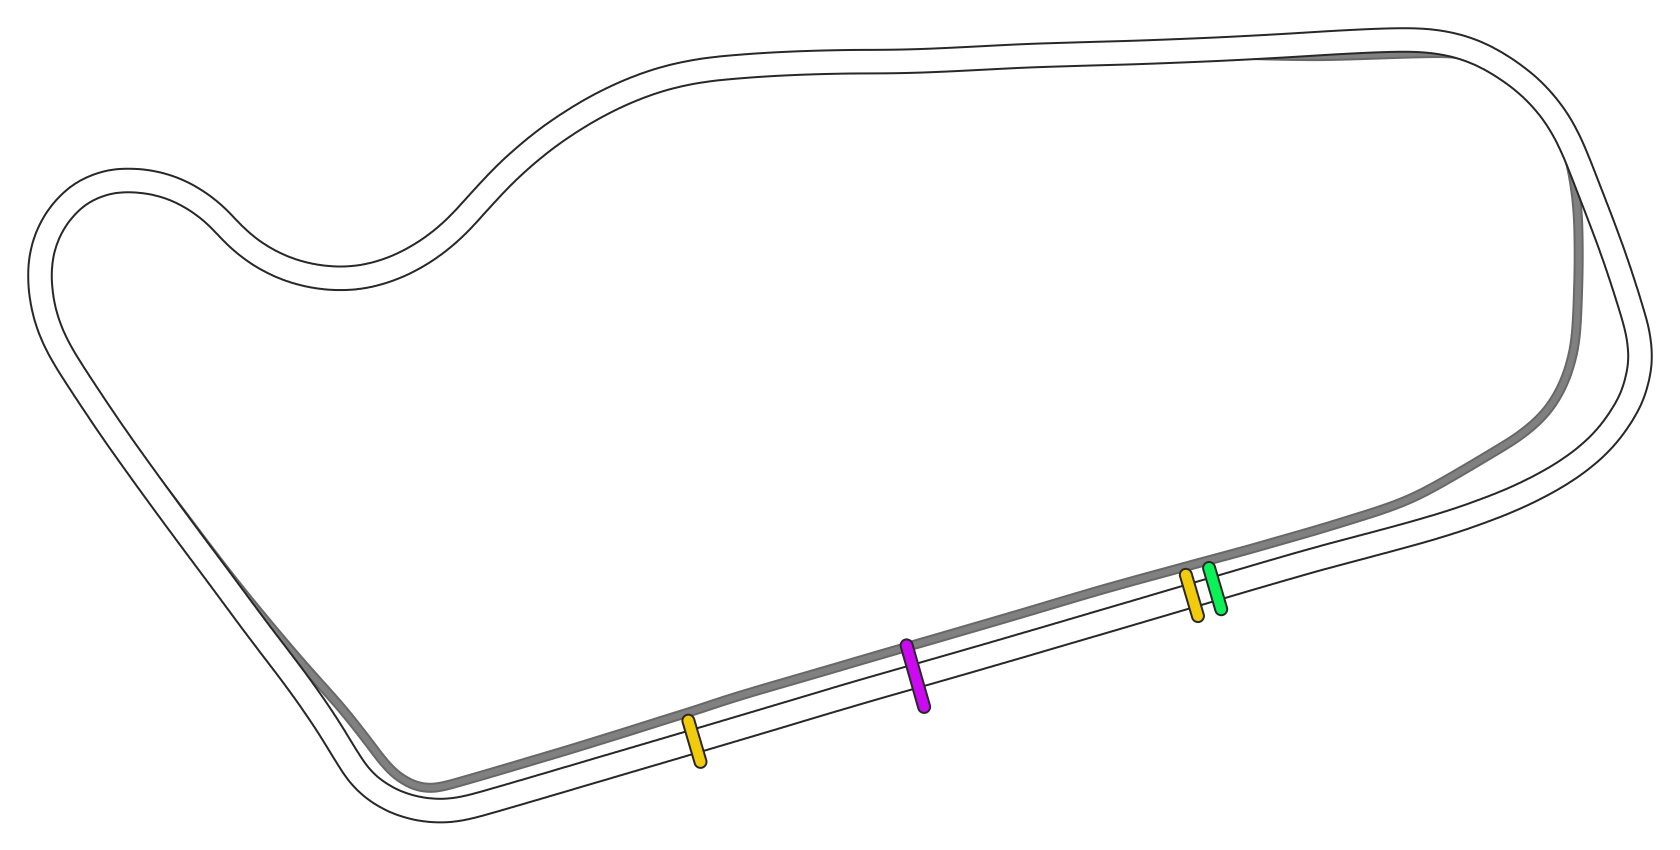 layout_national_drs